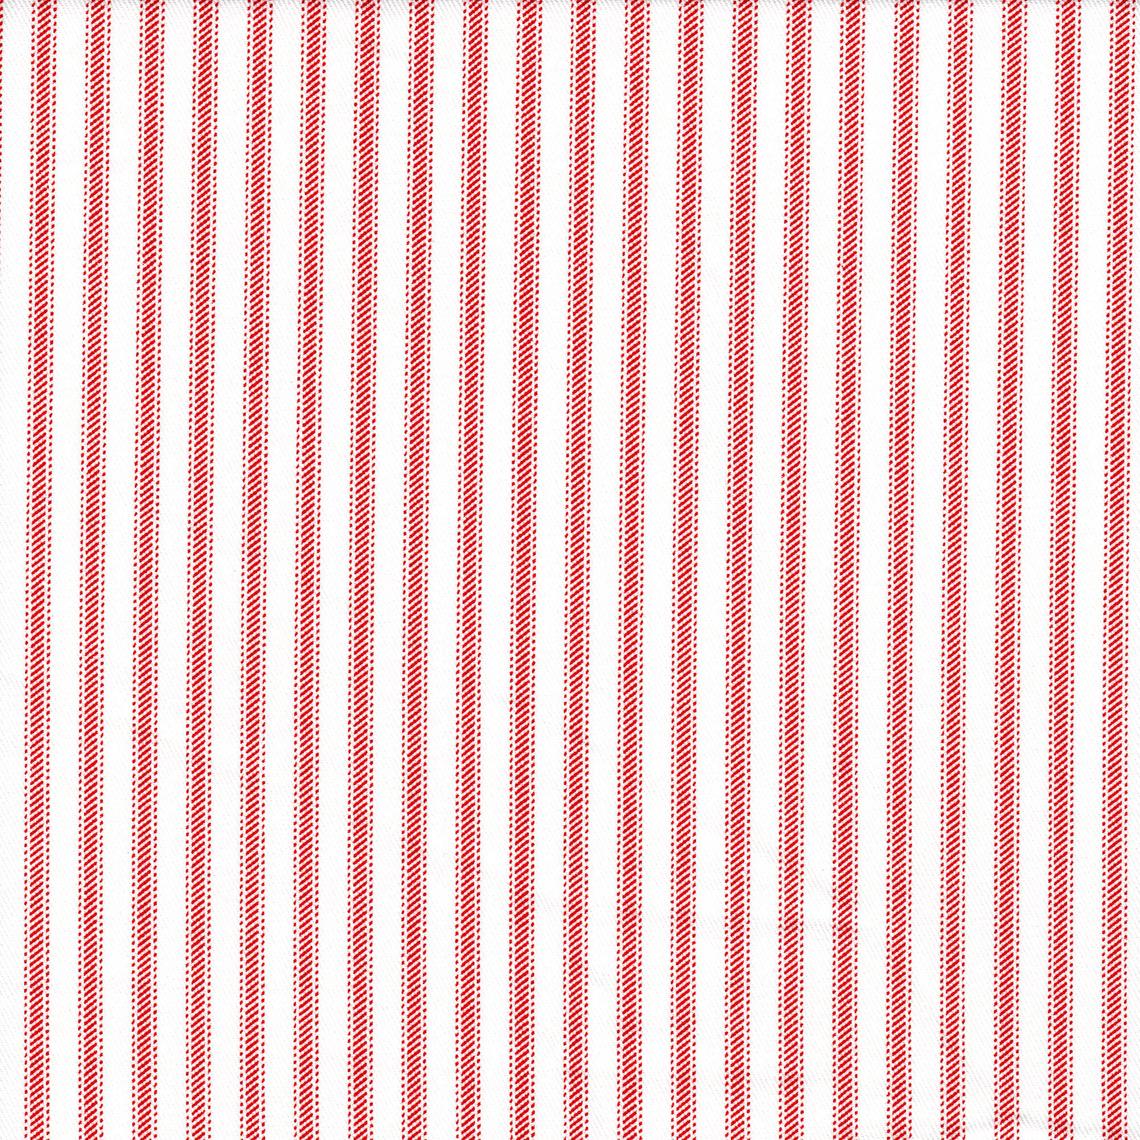 scalloped valance in classic lipstick red ticking stripe on white